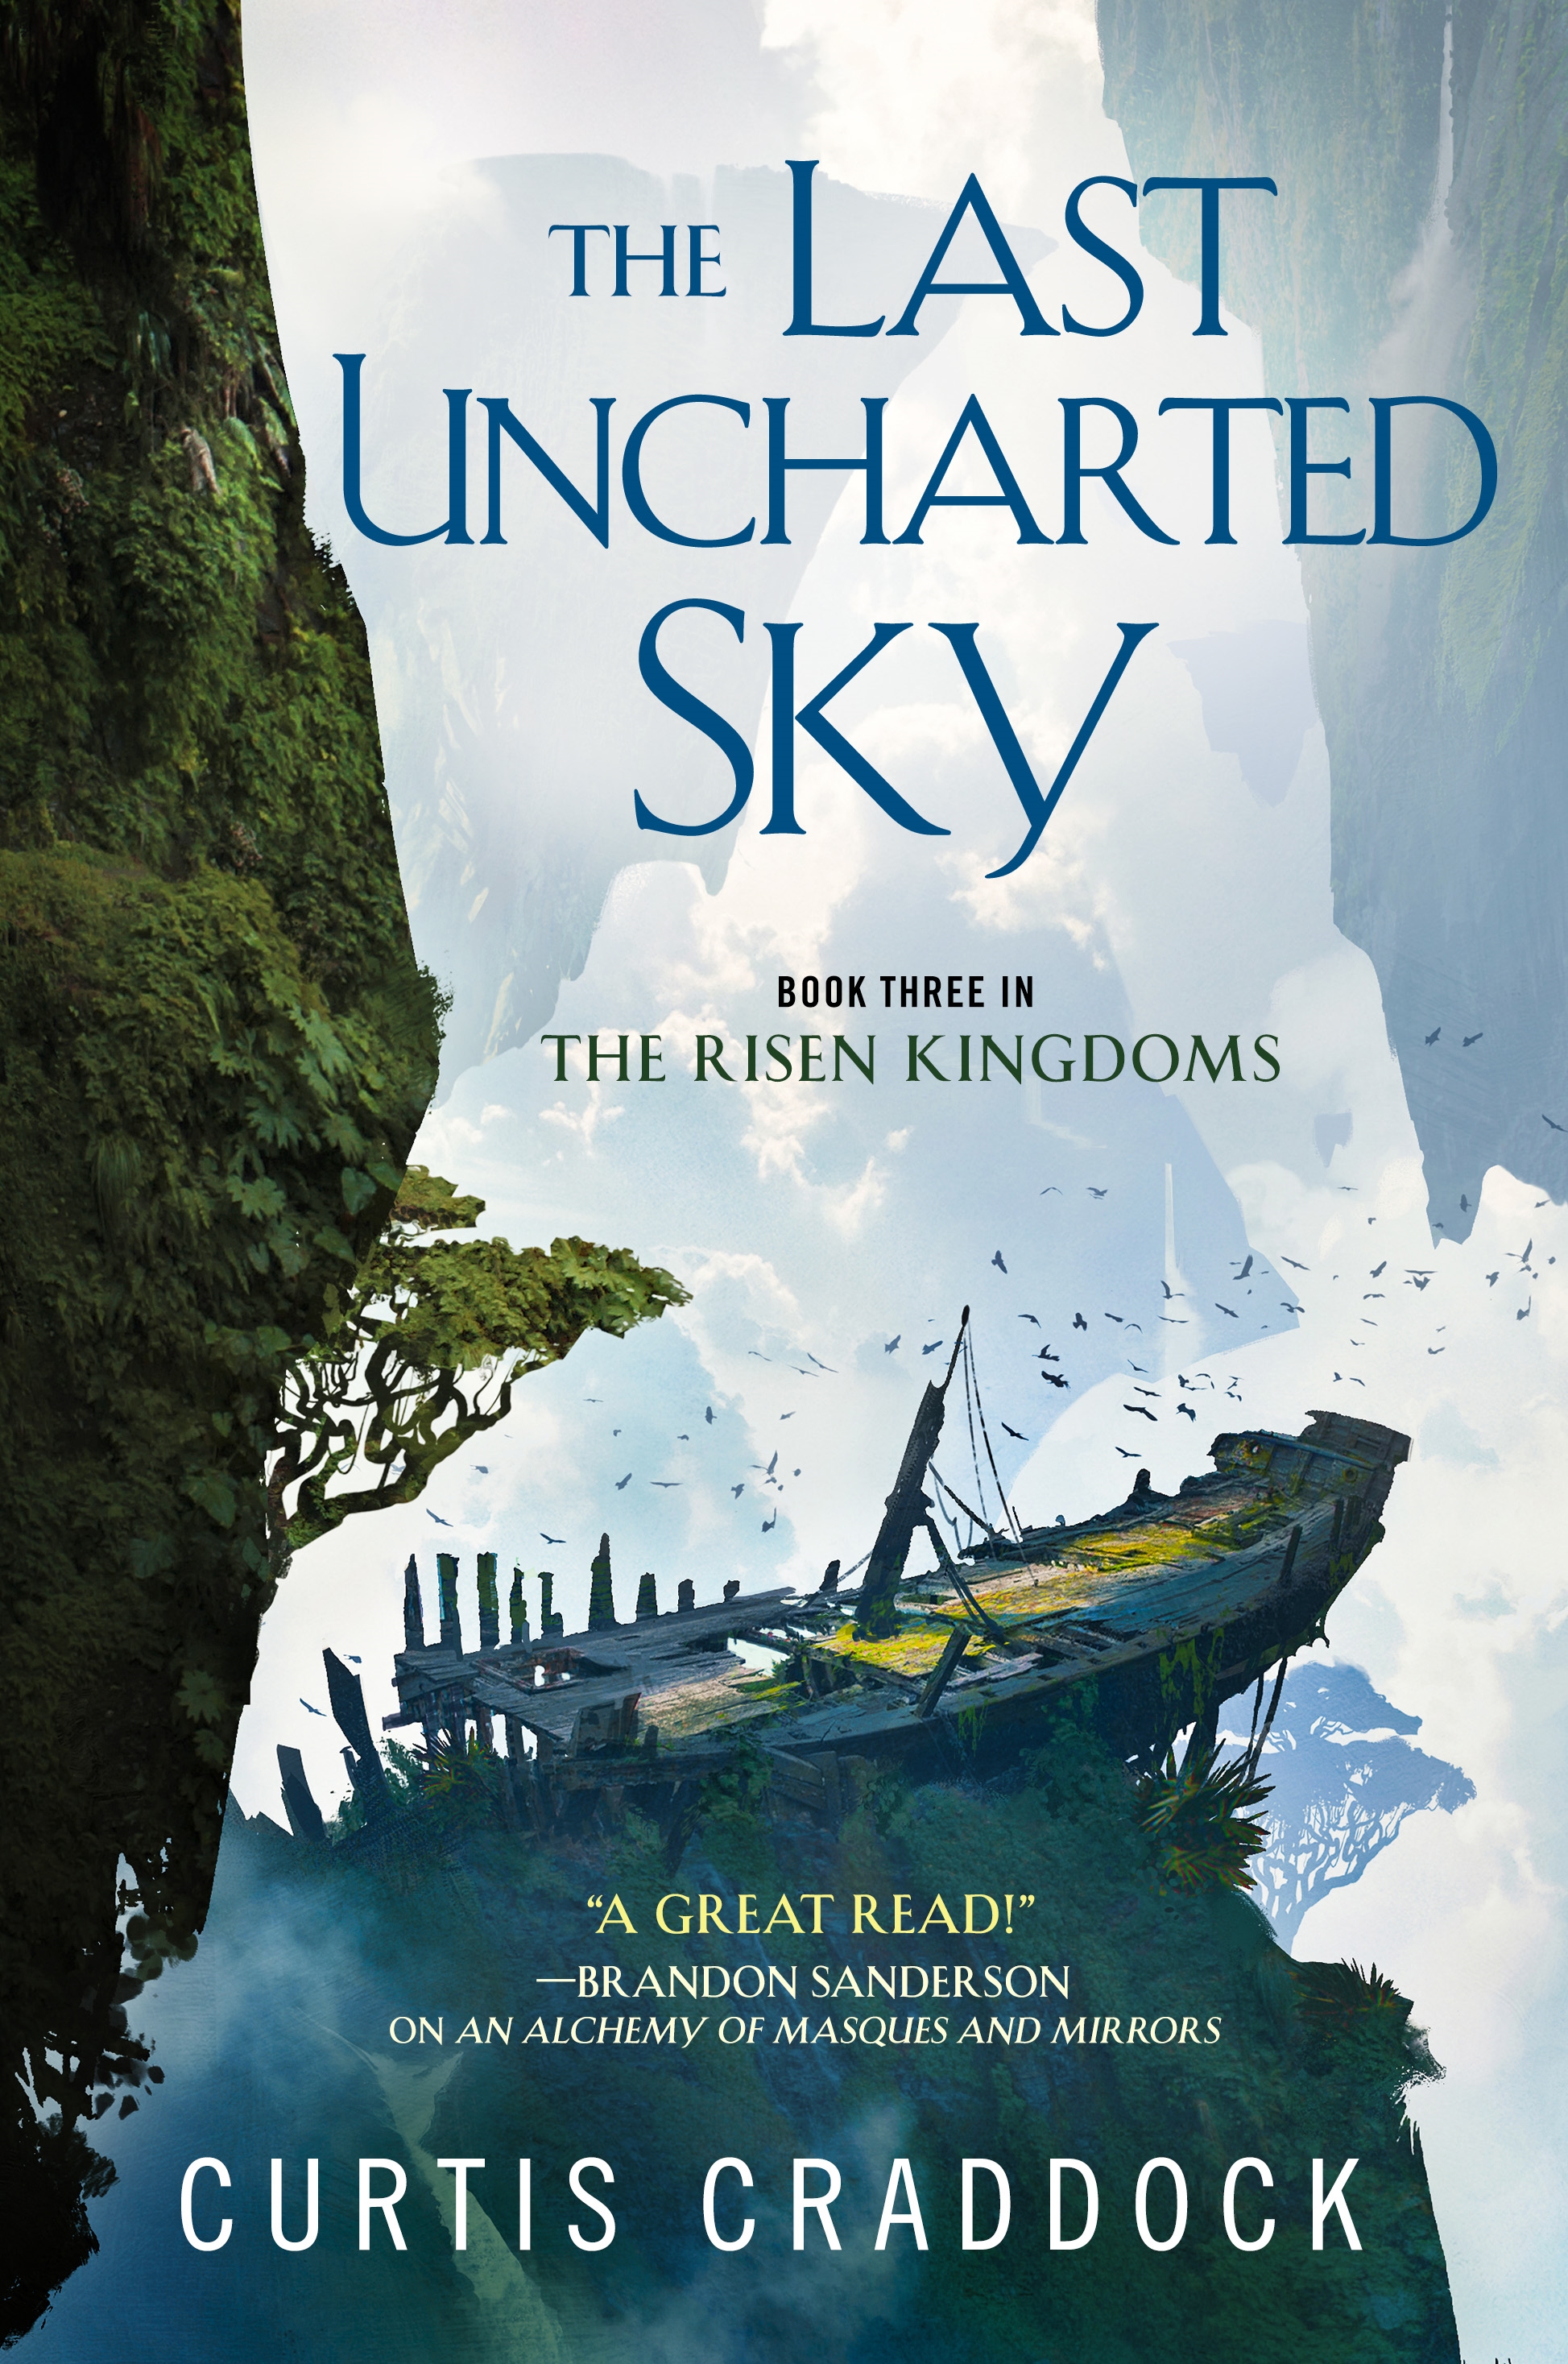 The Last Uncharted Sky : Book 3 of The Risen Kingdoms by Curtis Craddock